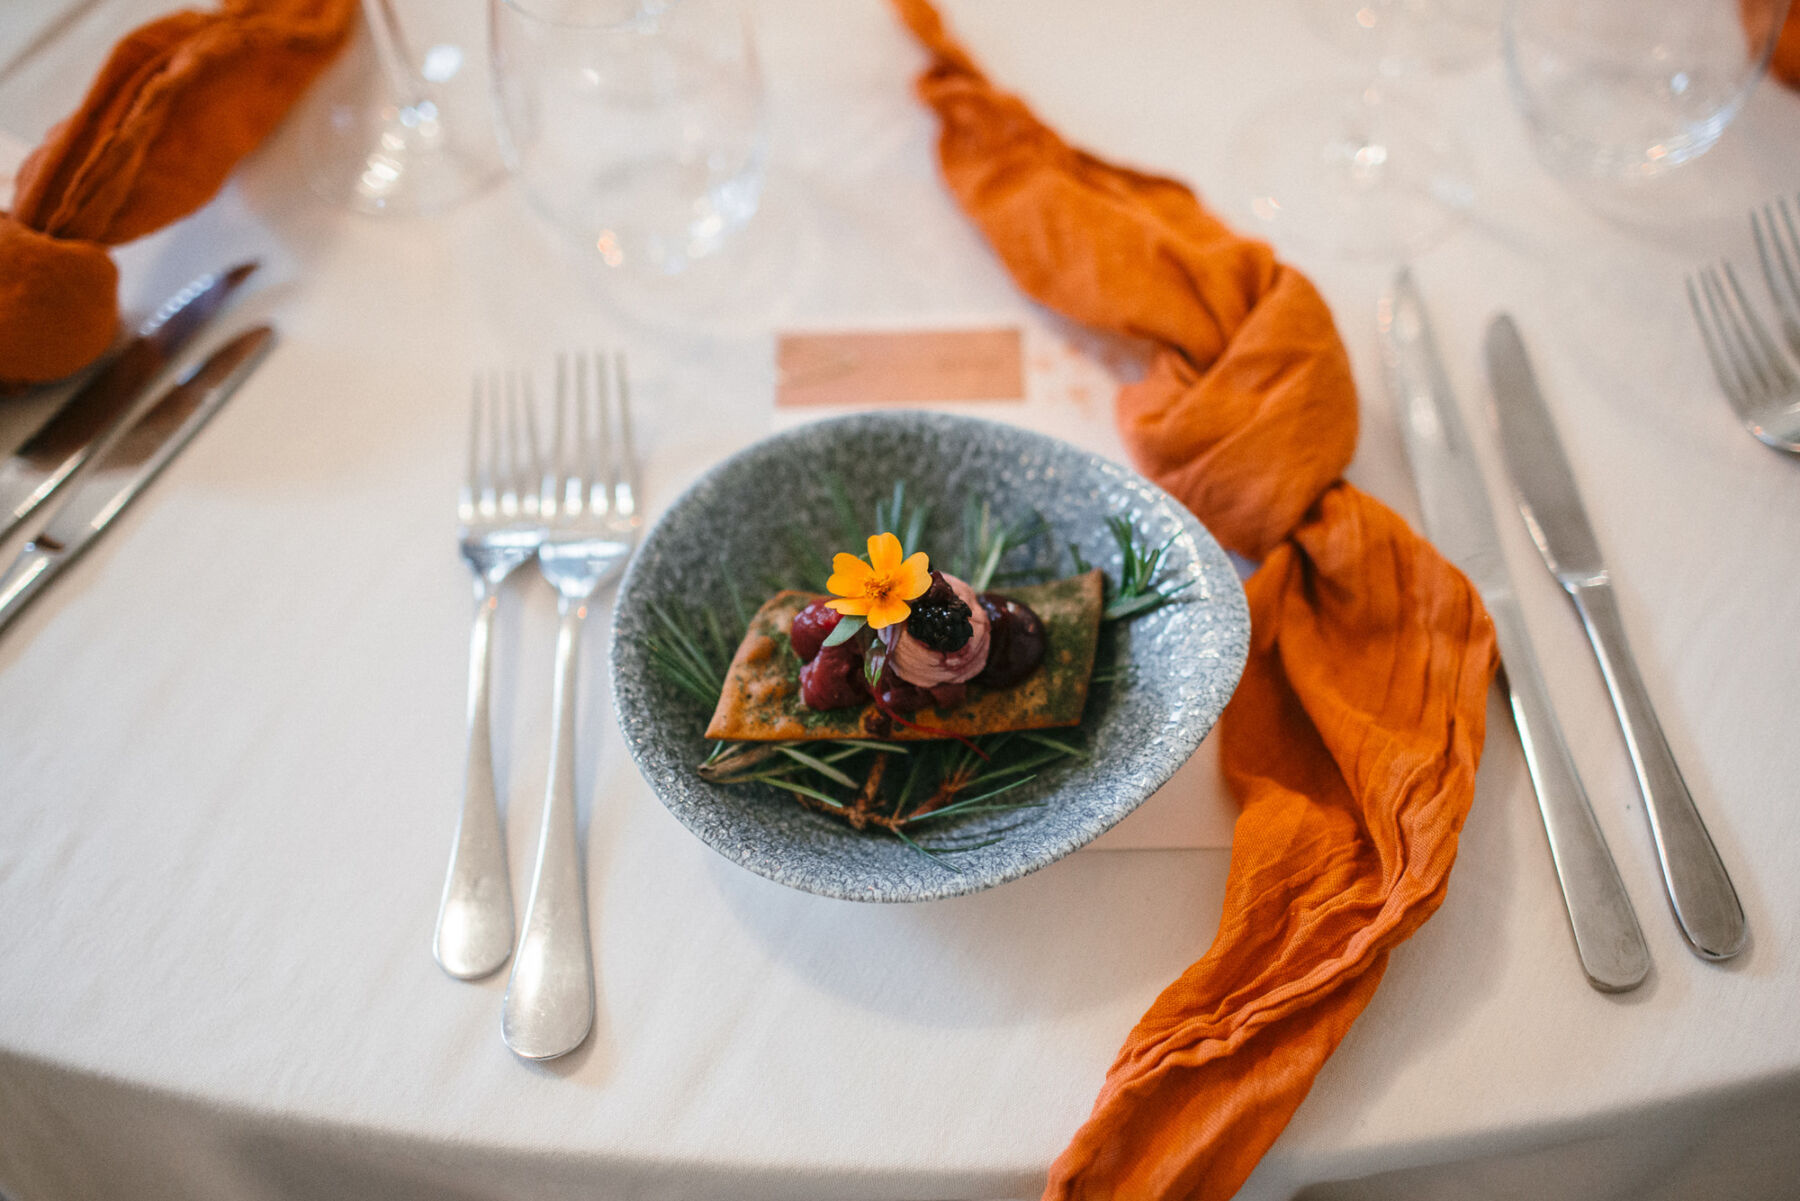 Creative wedding food decorated with edible flowers. Pottery dish and burned orange napkins.